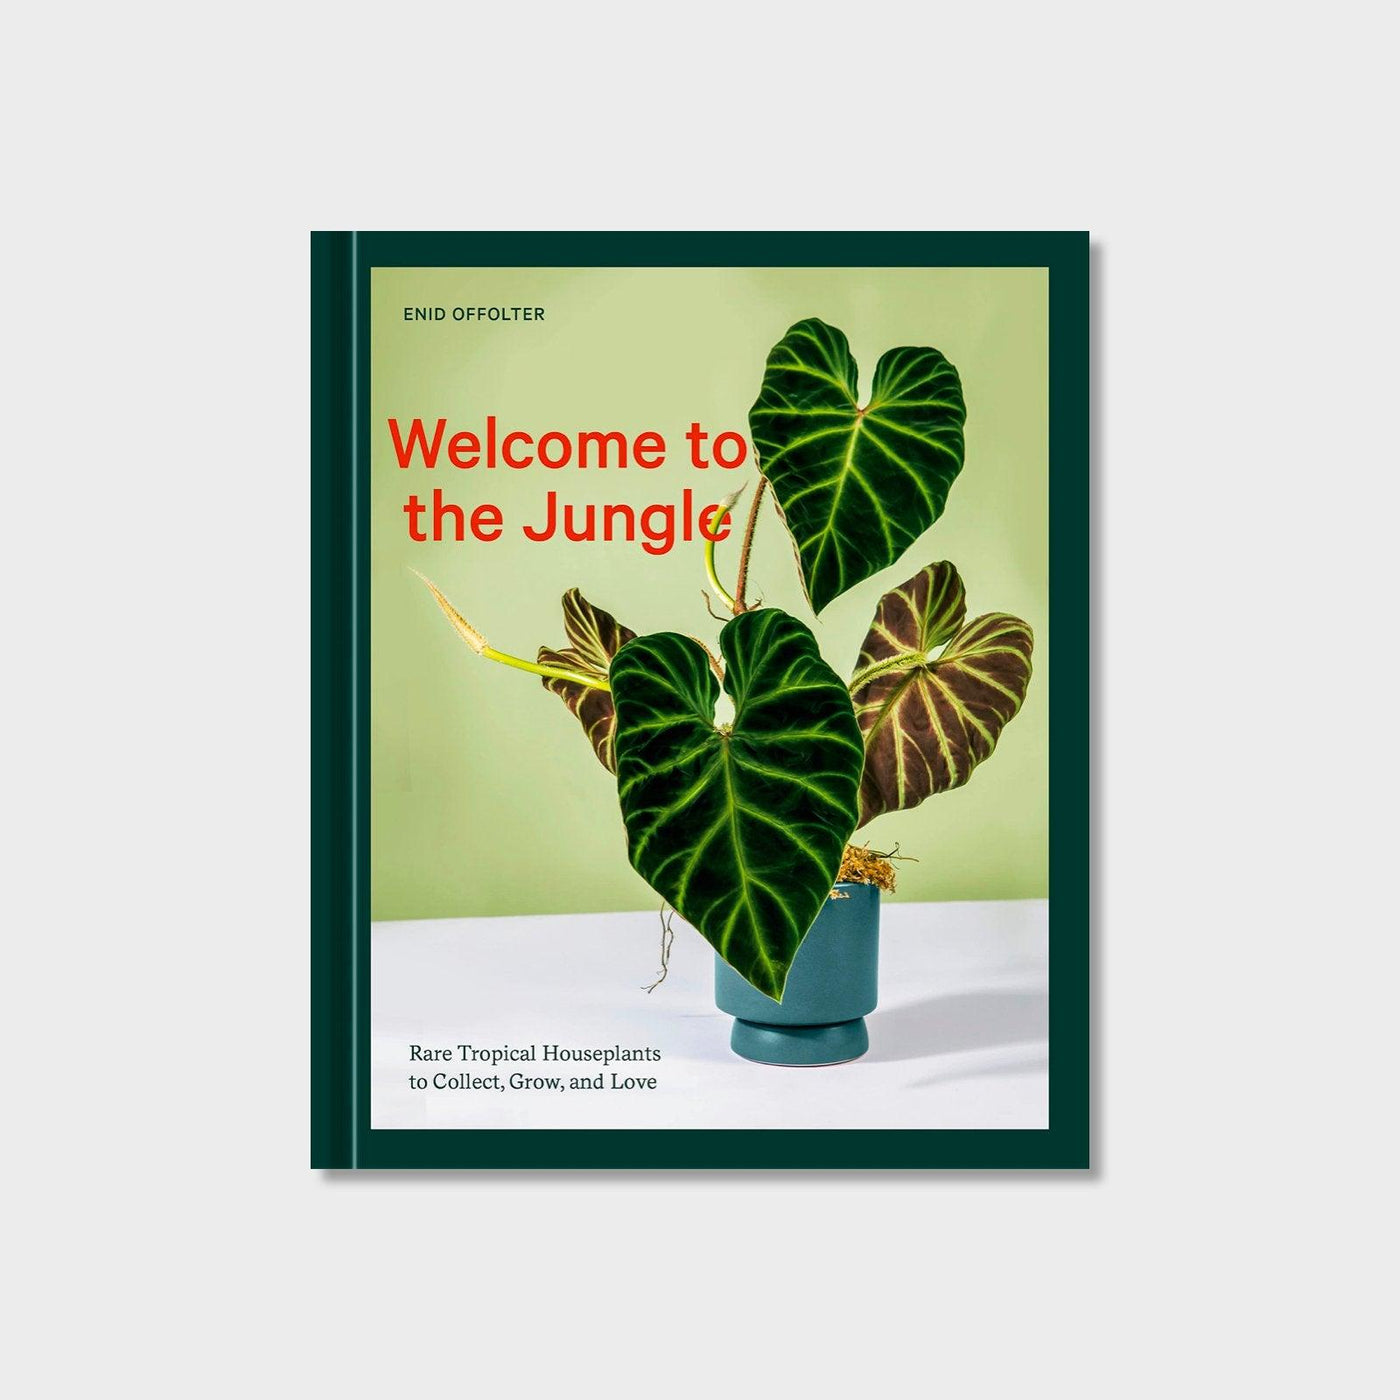 Welcome to the Jungle: Rare Tropical Houseplants to Collect, Grow, and Love - House of Kojo